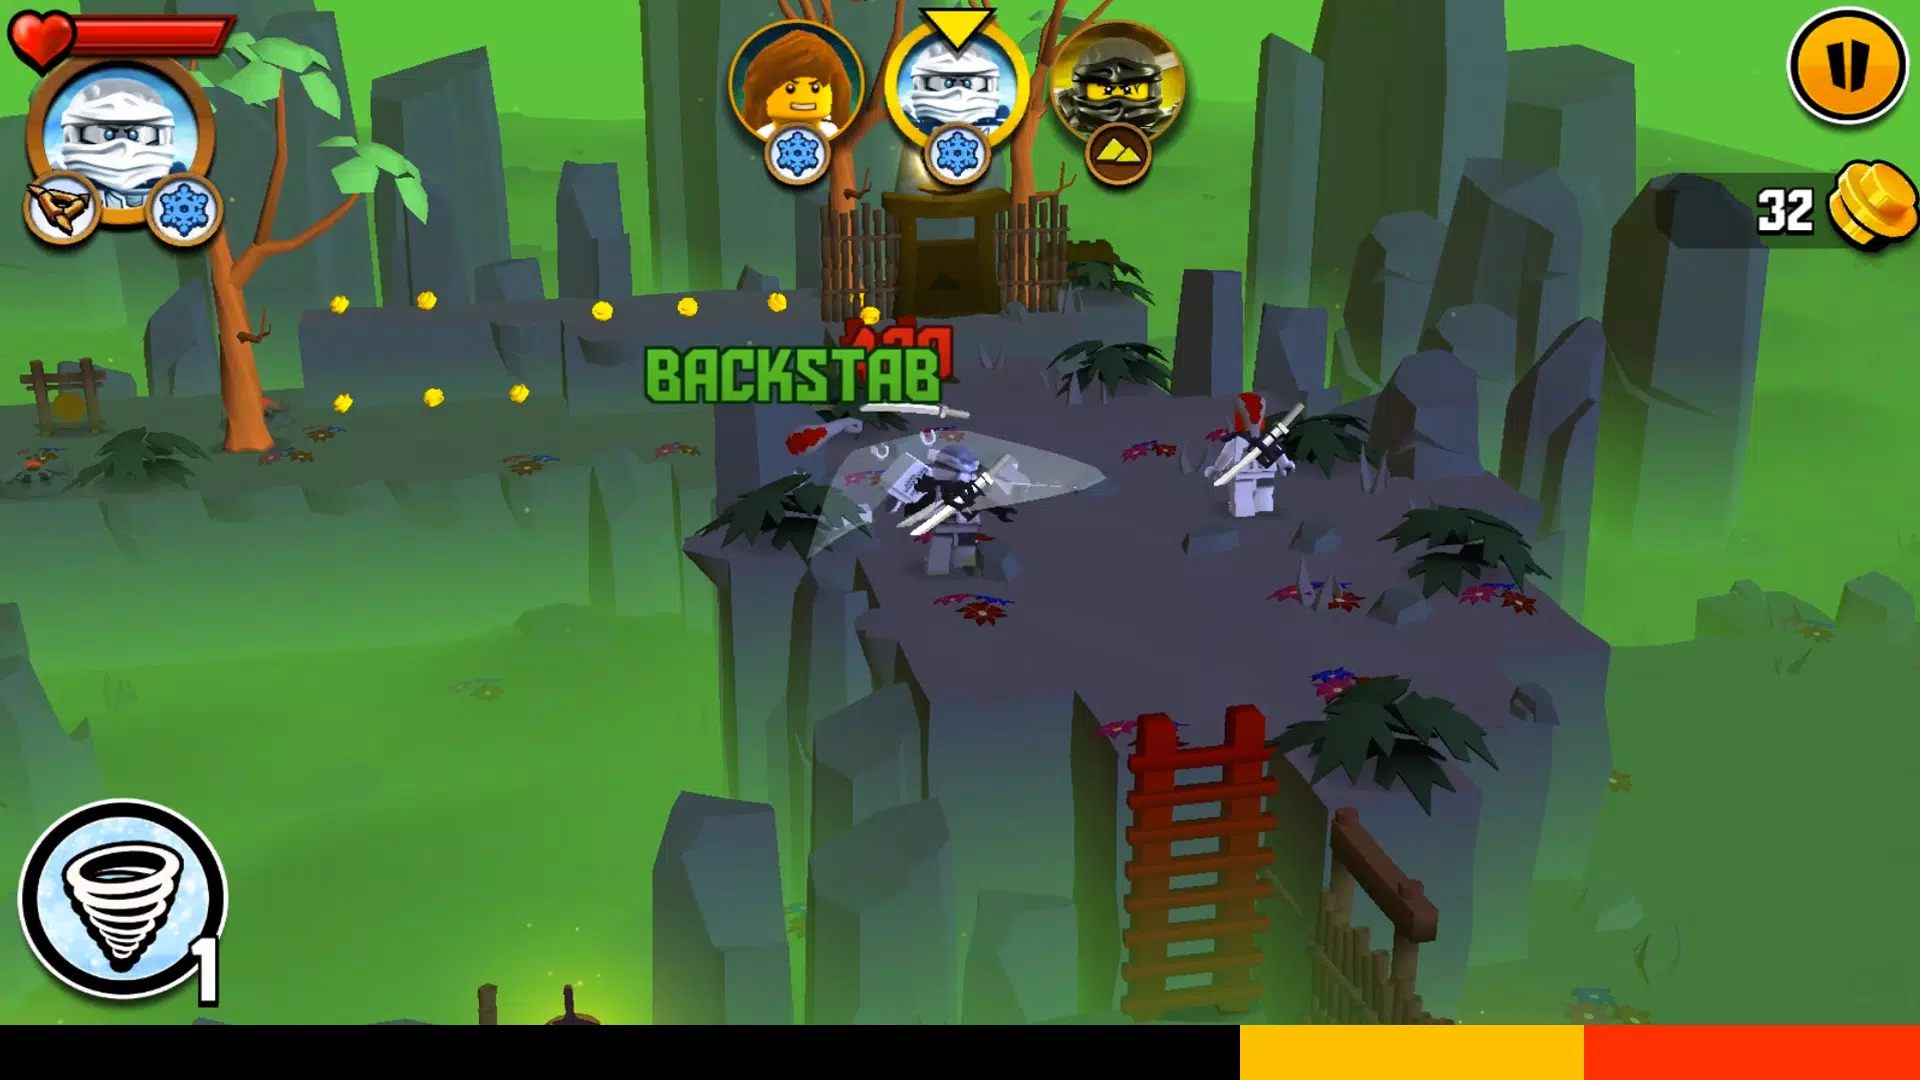 Top LEGO Ninjago WU-CRU For Guide for Android - APK Download